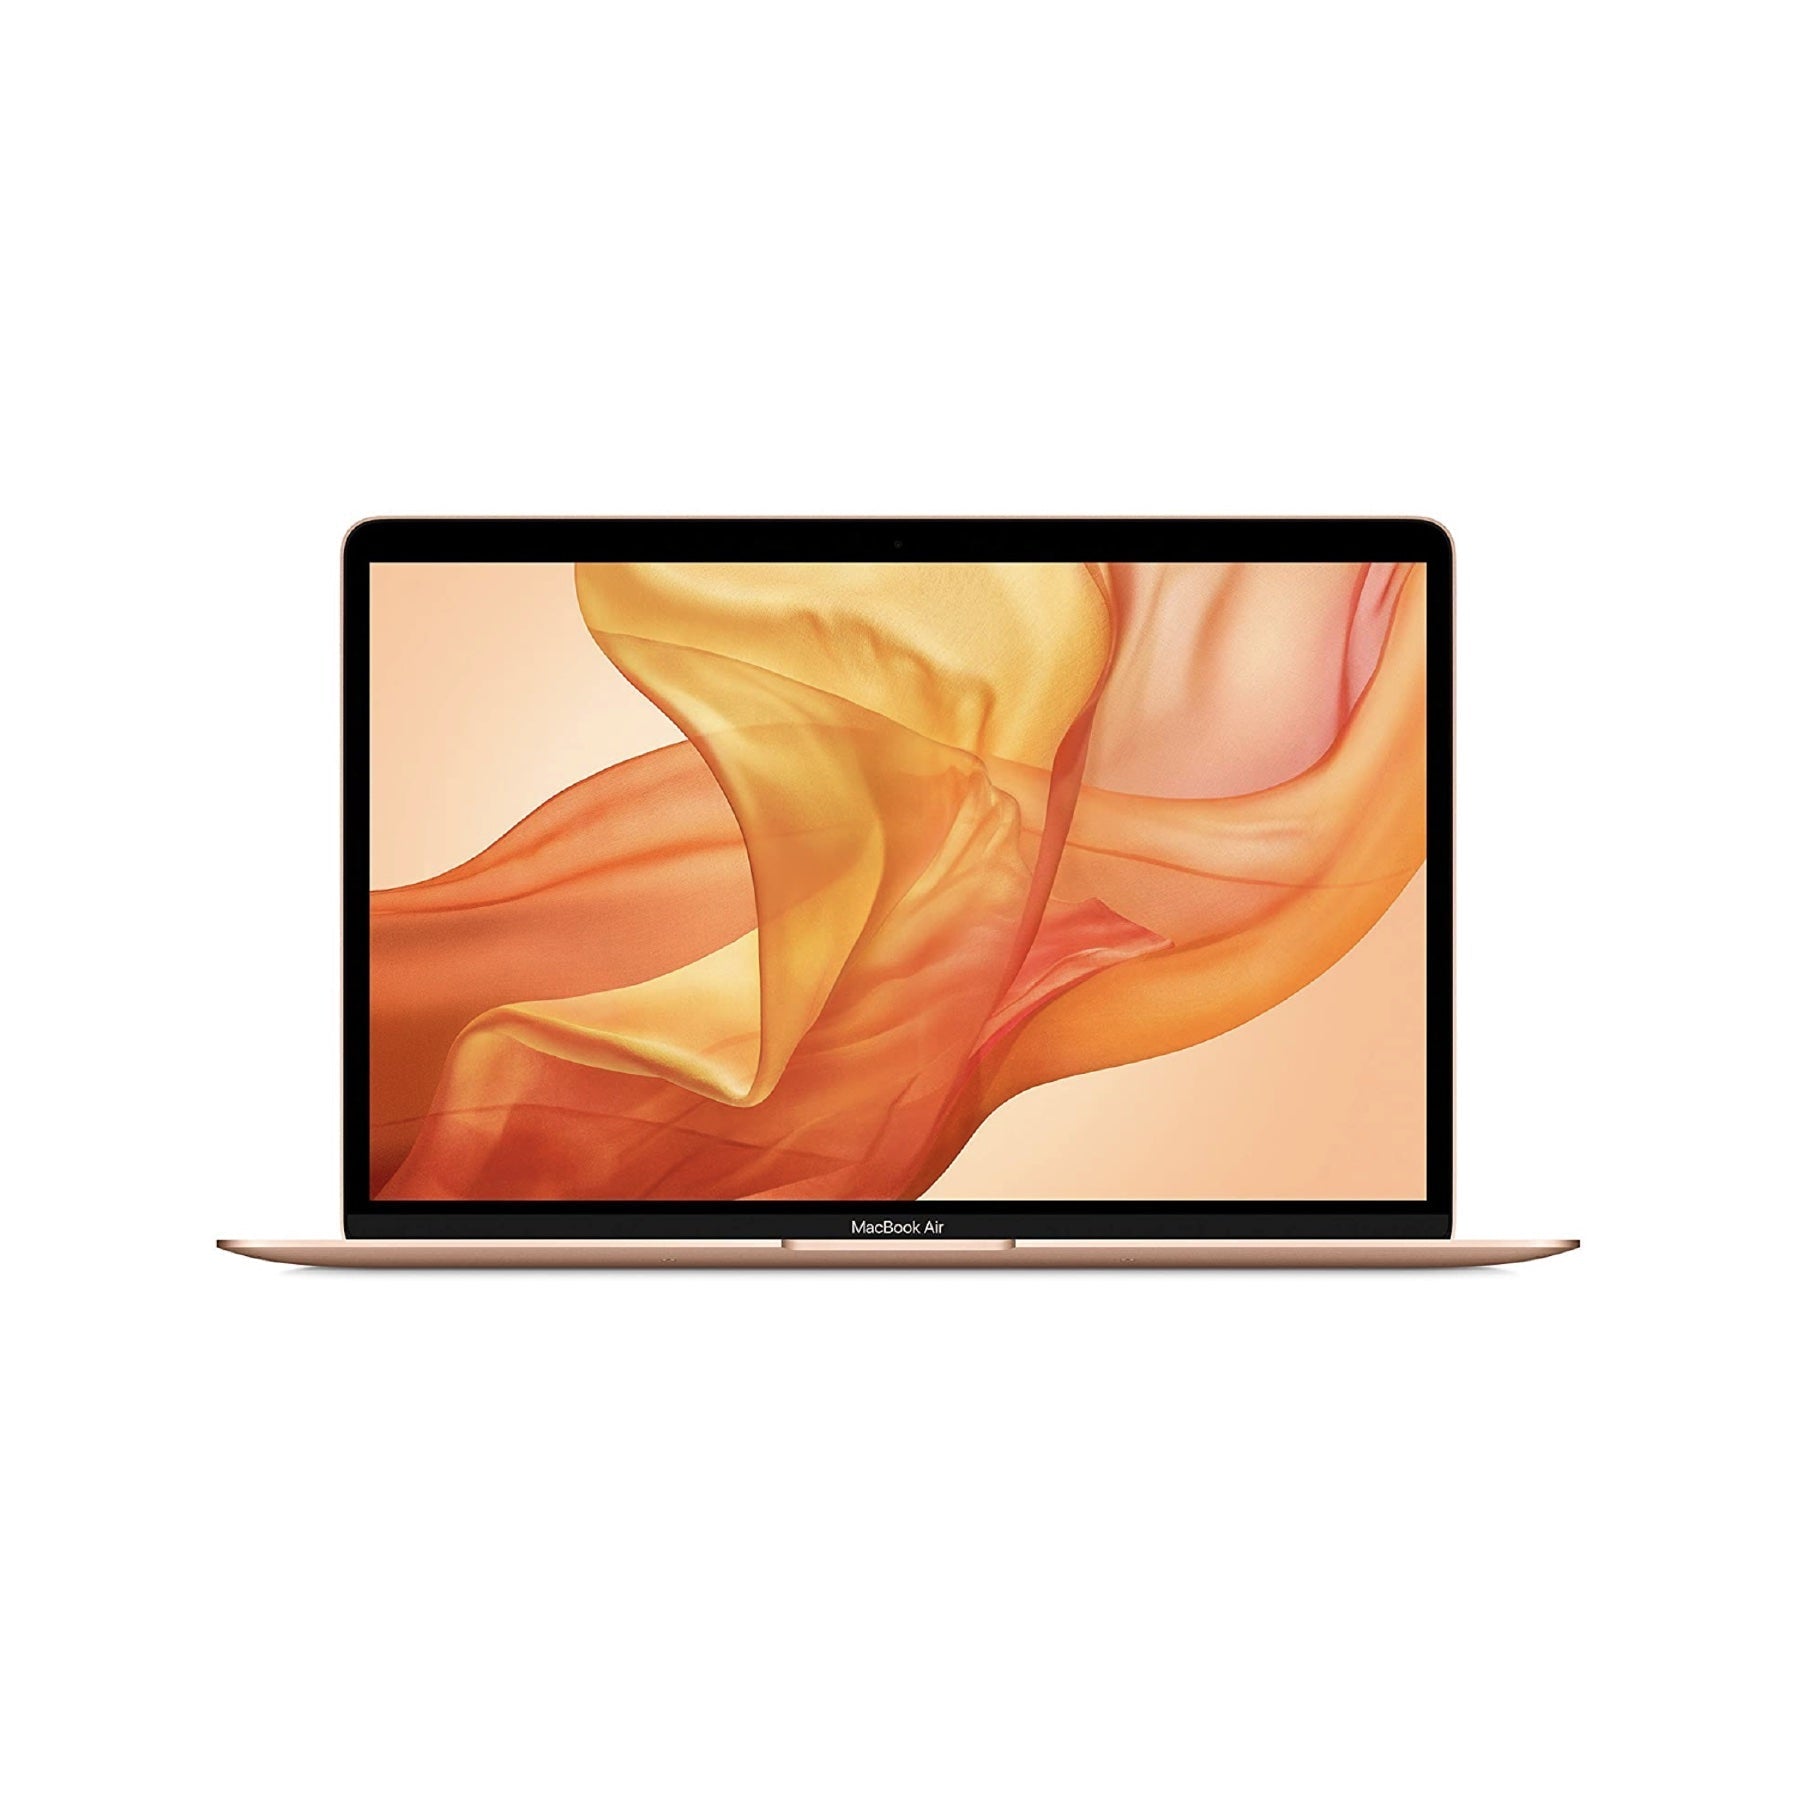 MacBook Air (Retina, 13-inch, 2019) 1.6GHz, Intel Core i5 256GB - Gold (Better) - iStore Pre-owned